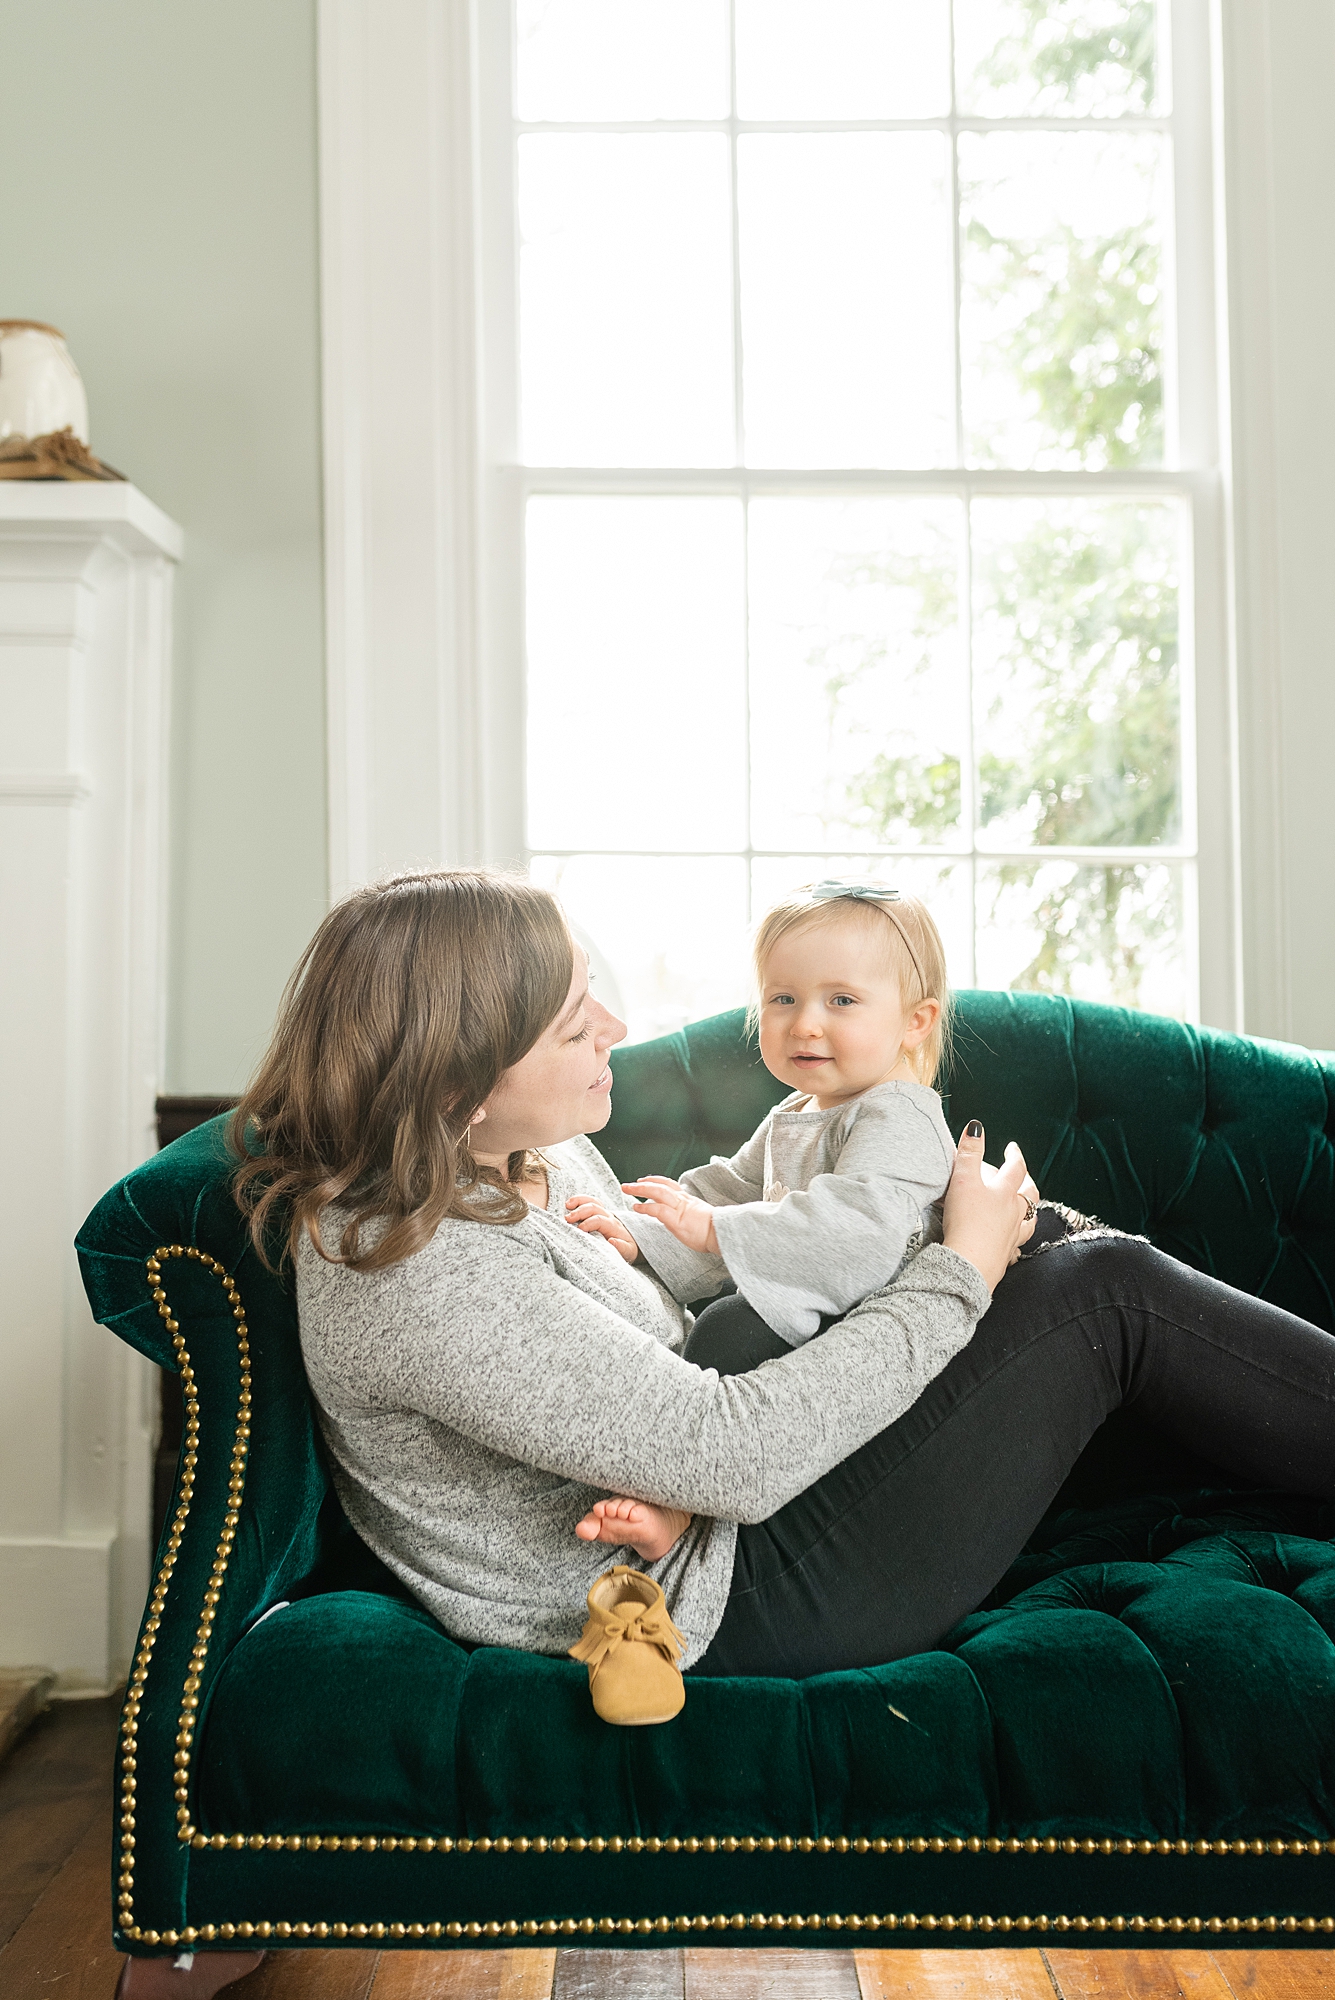 Mother and Daughter Portraits by Dolly DeLong Photography Nashville Family Photographer